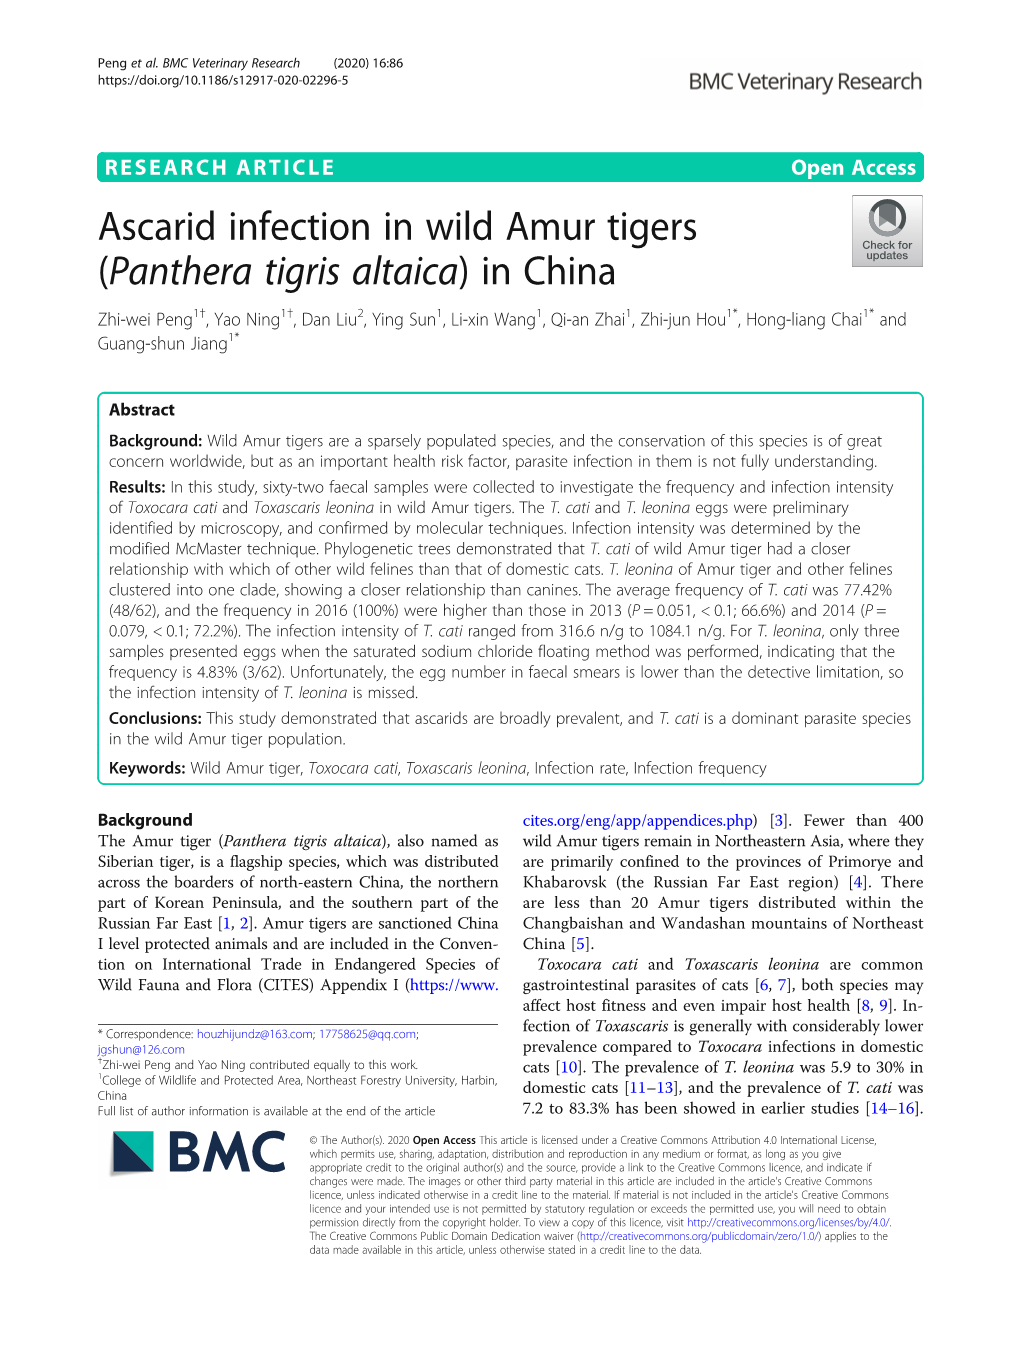 Ascarid Infection in Wild Amur Tigers